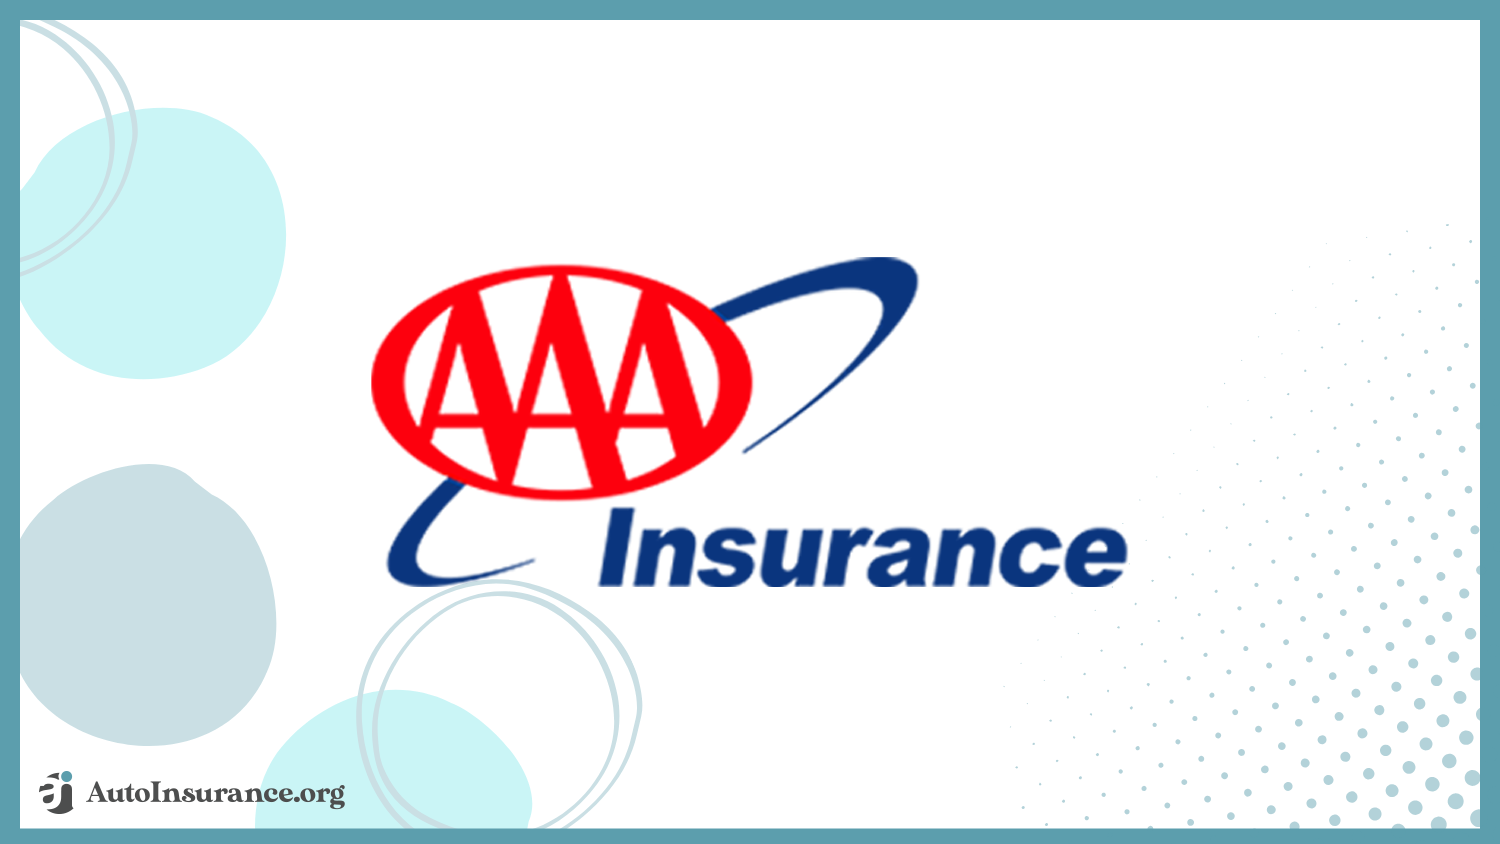 AAA: Best Auto Insurance for Doctors